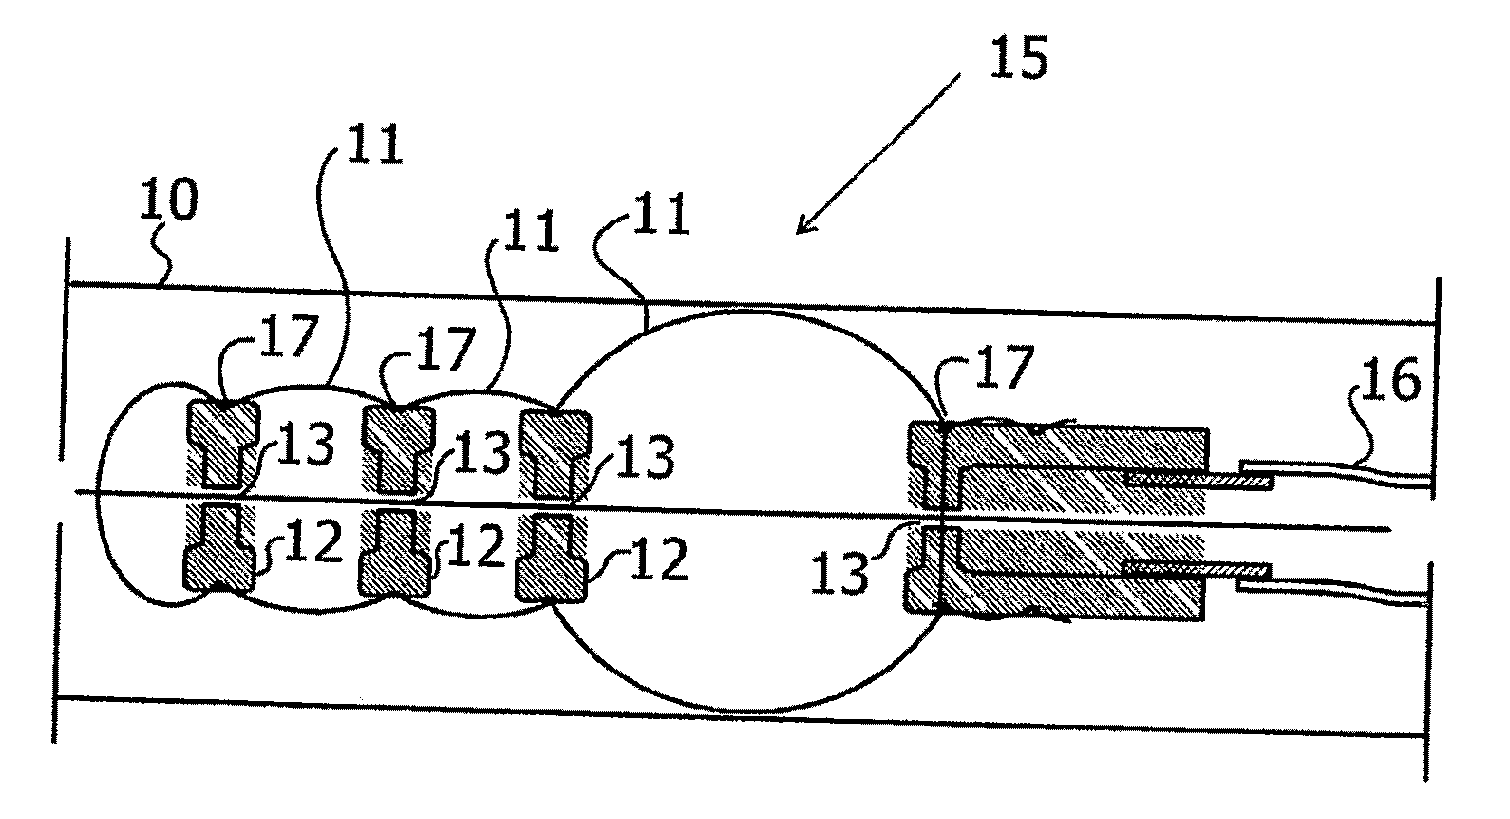 Inflatable chamber device for motion through a passage